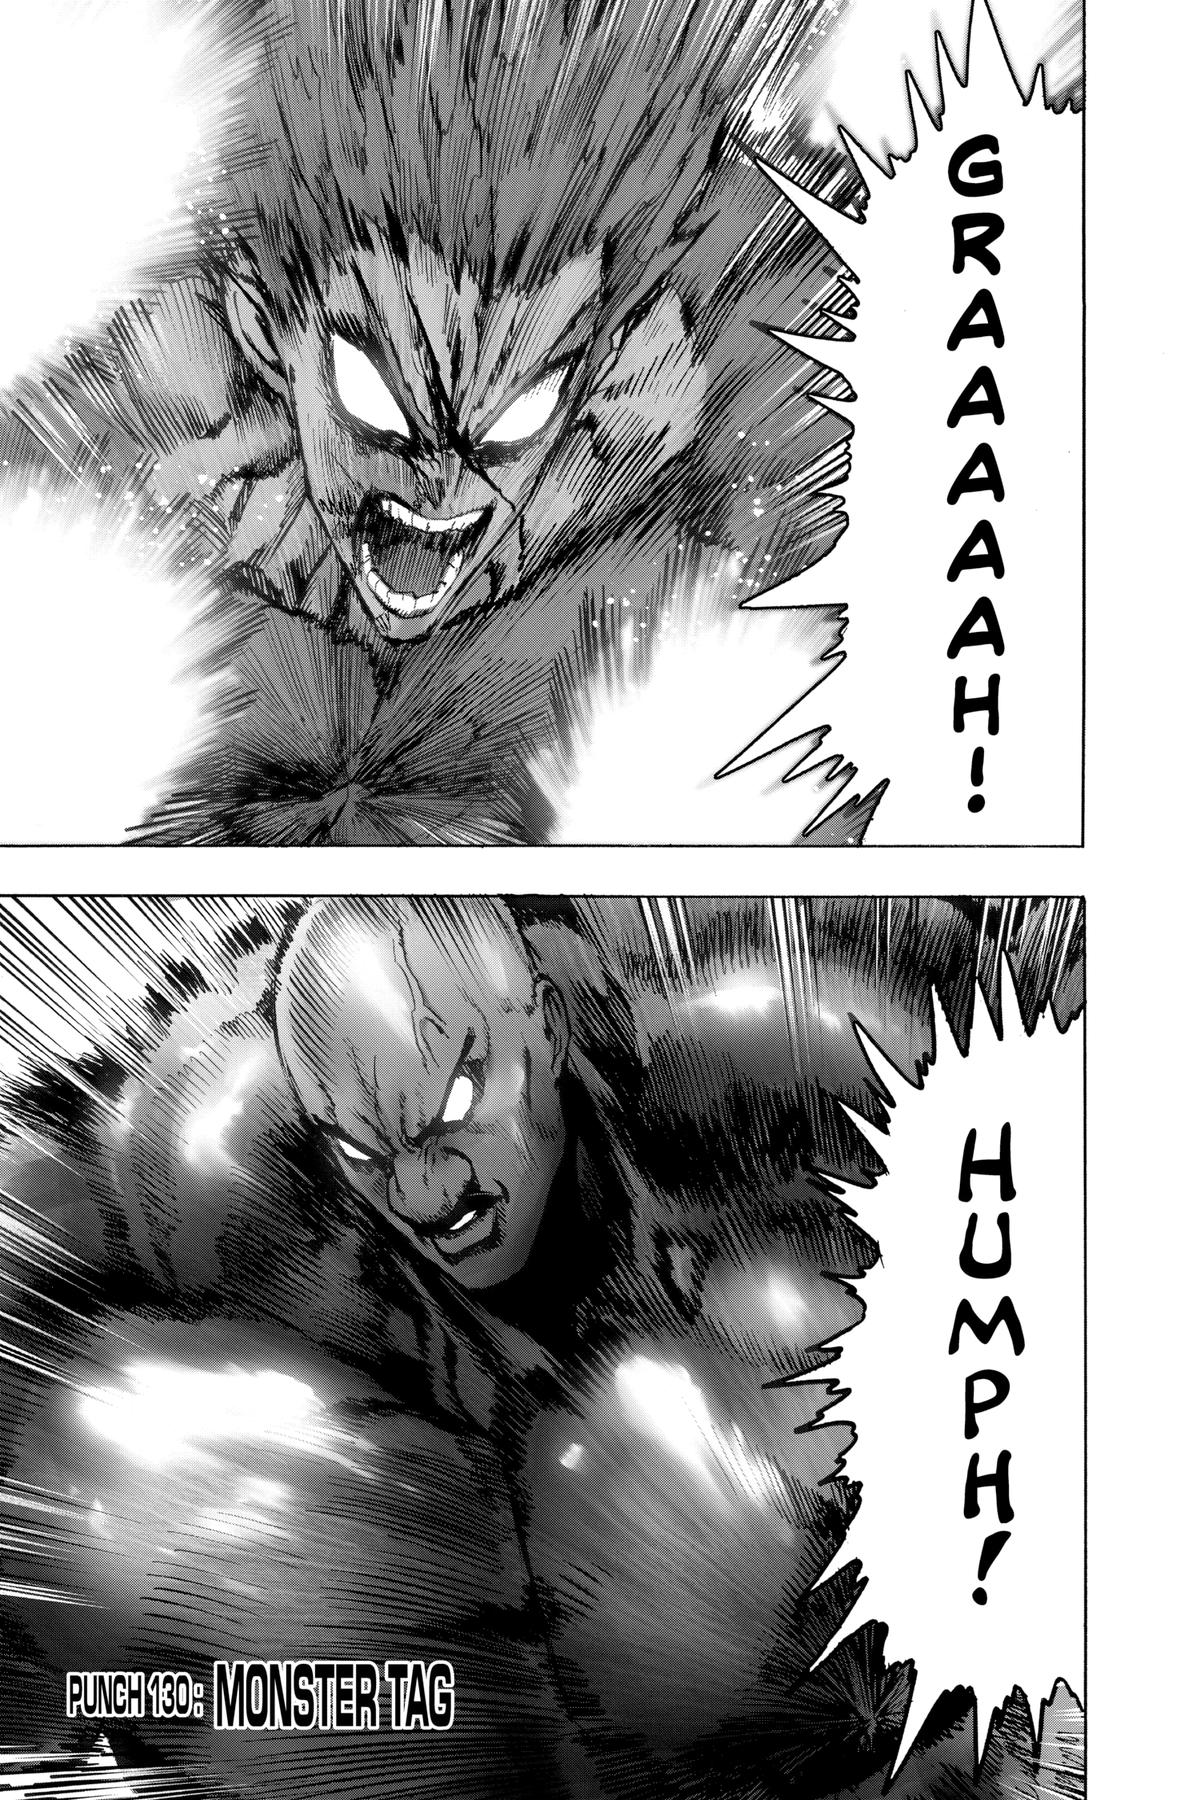 One-Punch Man, Punch 130 image 01